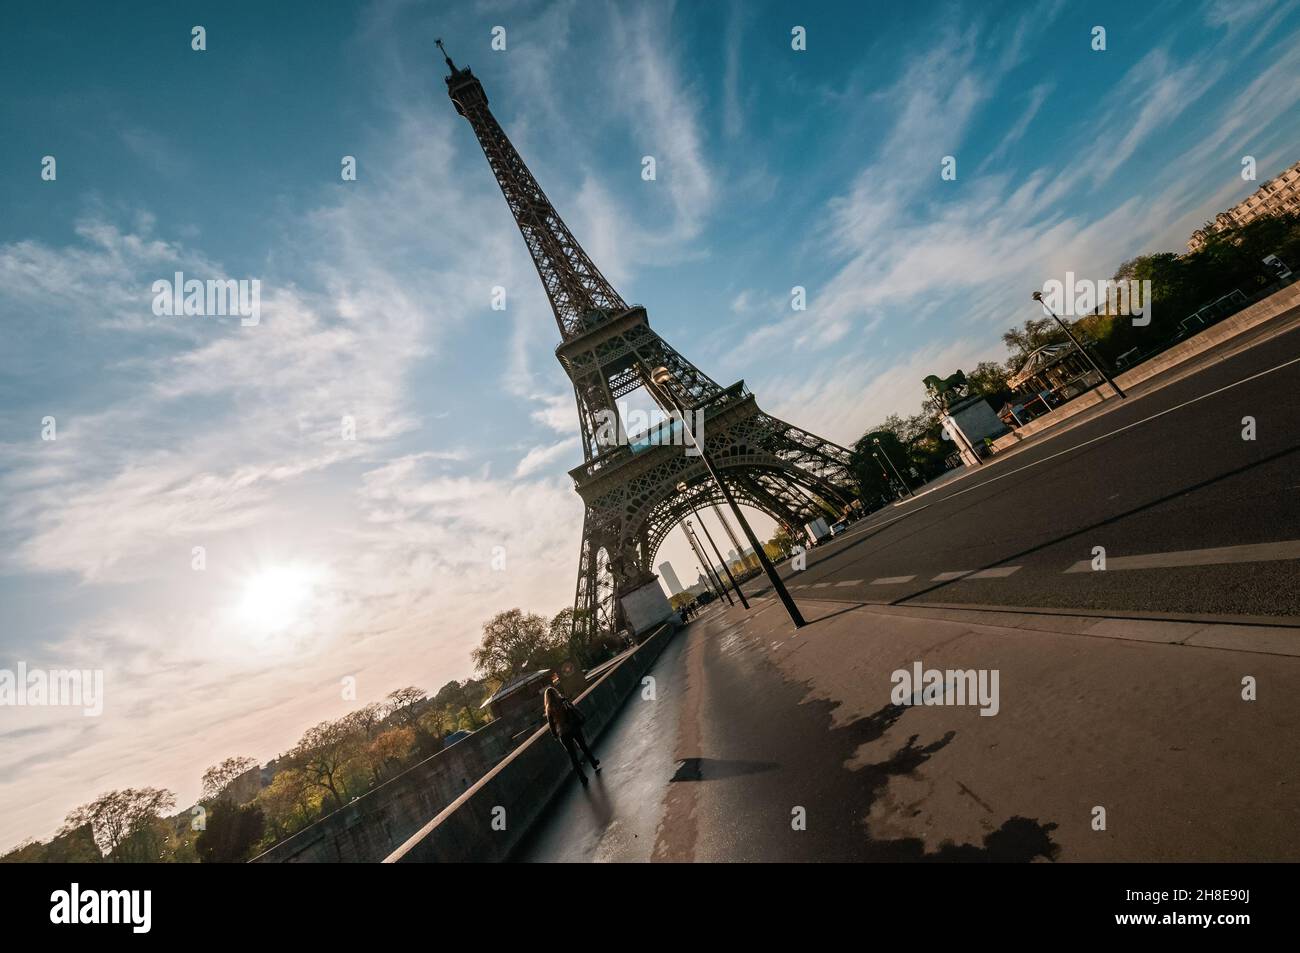 One morning in front of the Eiffel Tower, Paris, France Stock Photo